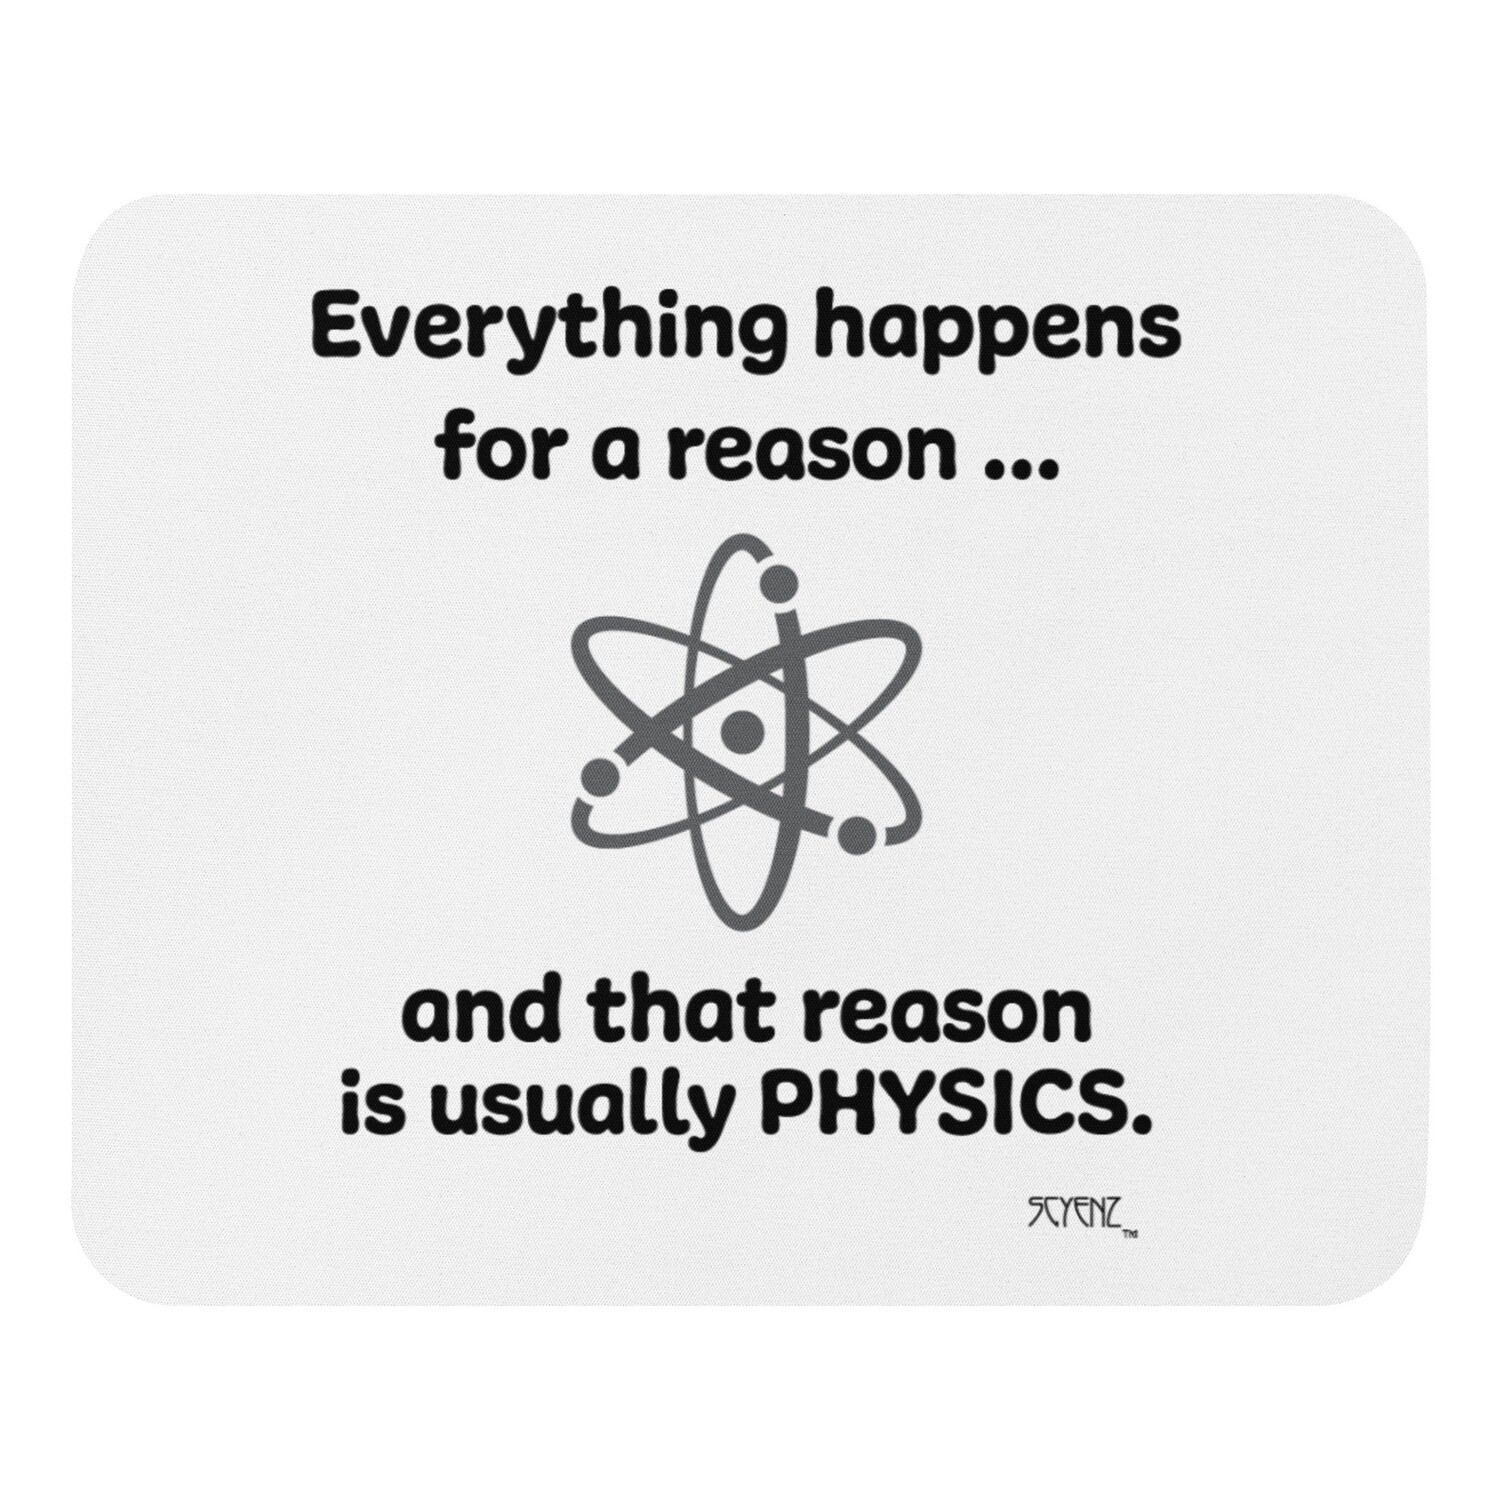 Usually_Physics SCYENZ Mouse pad - Science and Math Collection